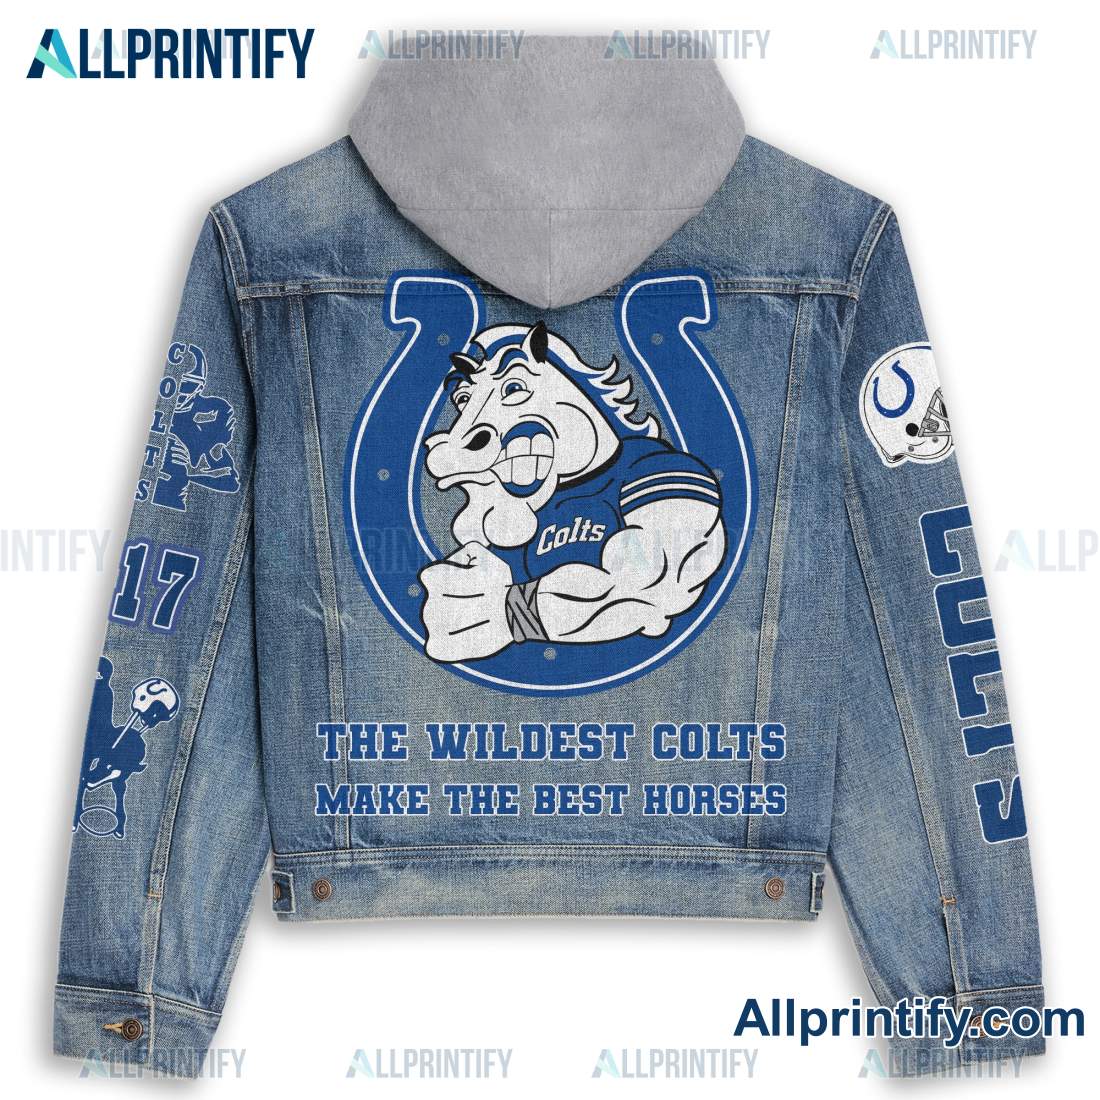 Indianapolis Colts The Wildest Colts Make The Best Horses Hooded Denim Jacket b